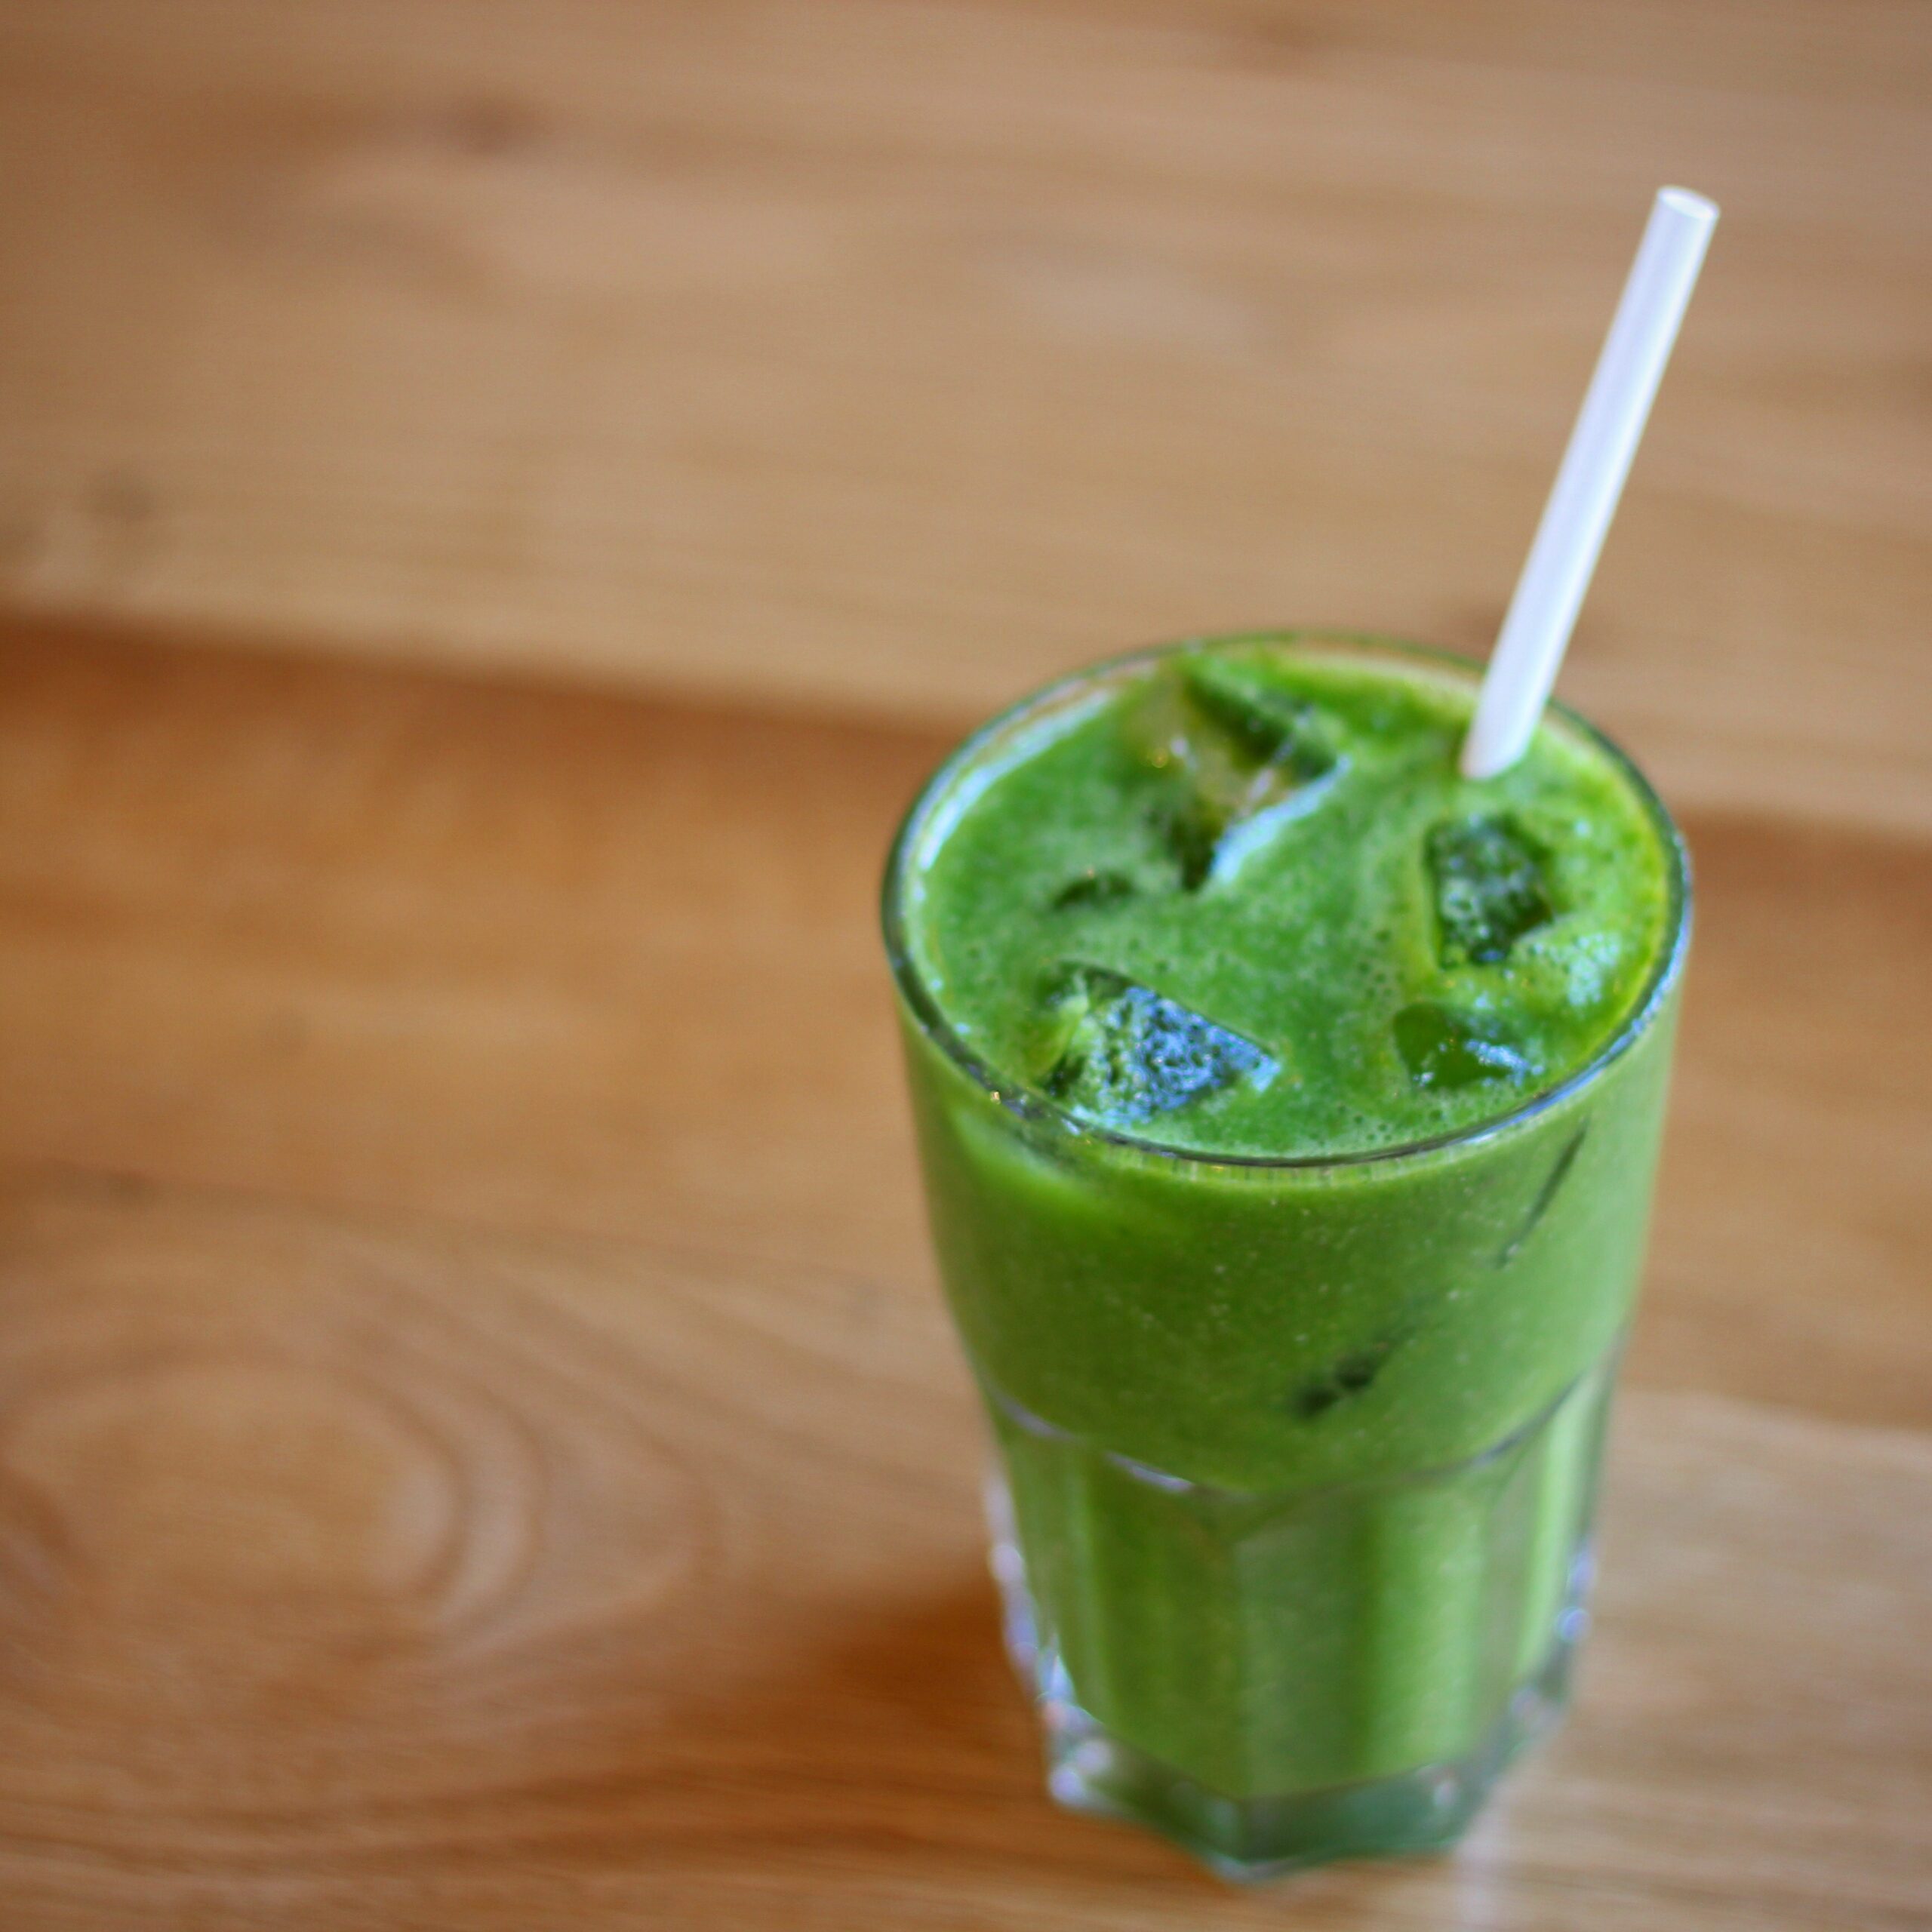 glass-of-green-smoothie-with-ice-and-straw-from-Boston Tea Party